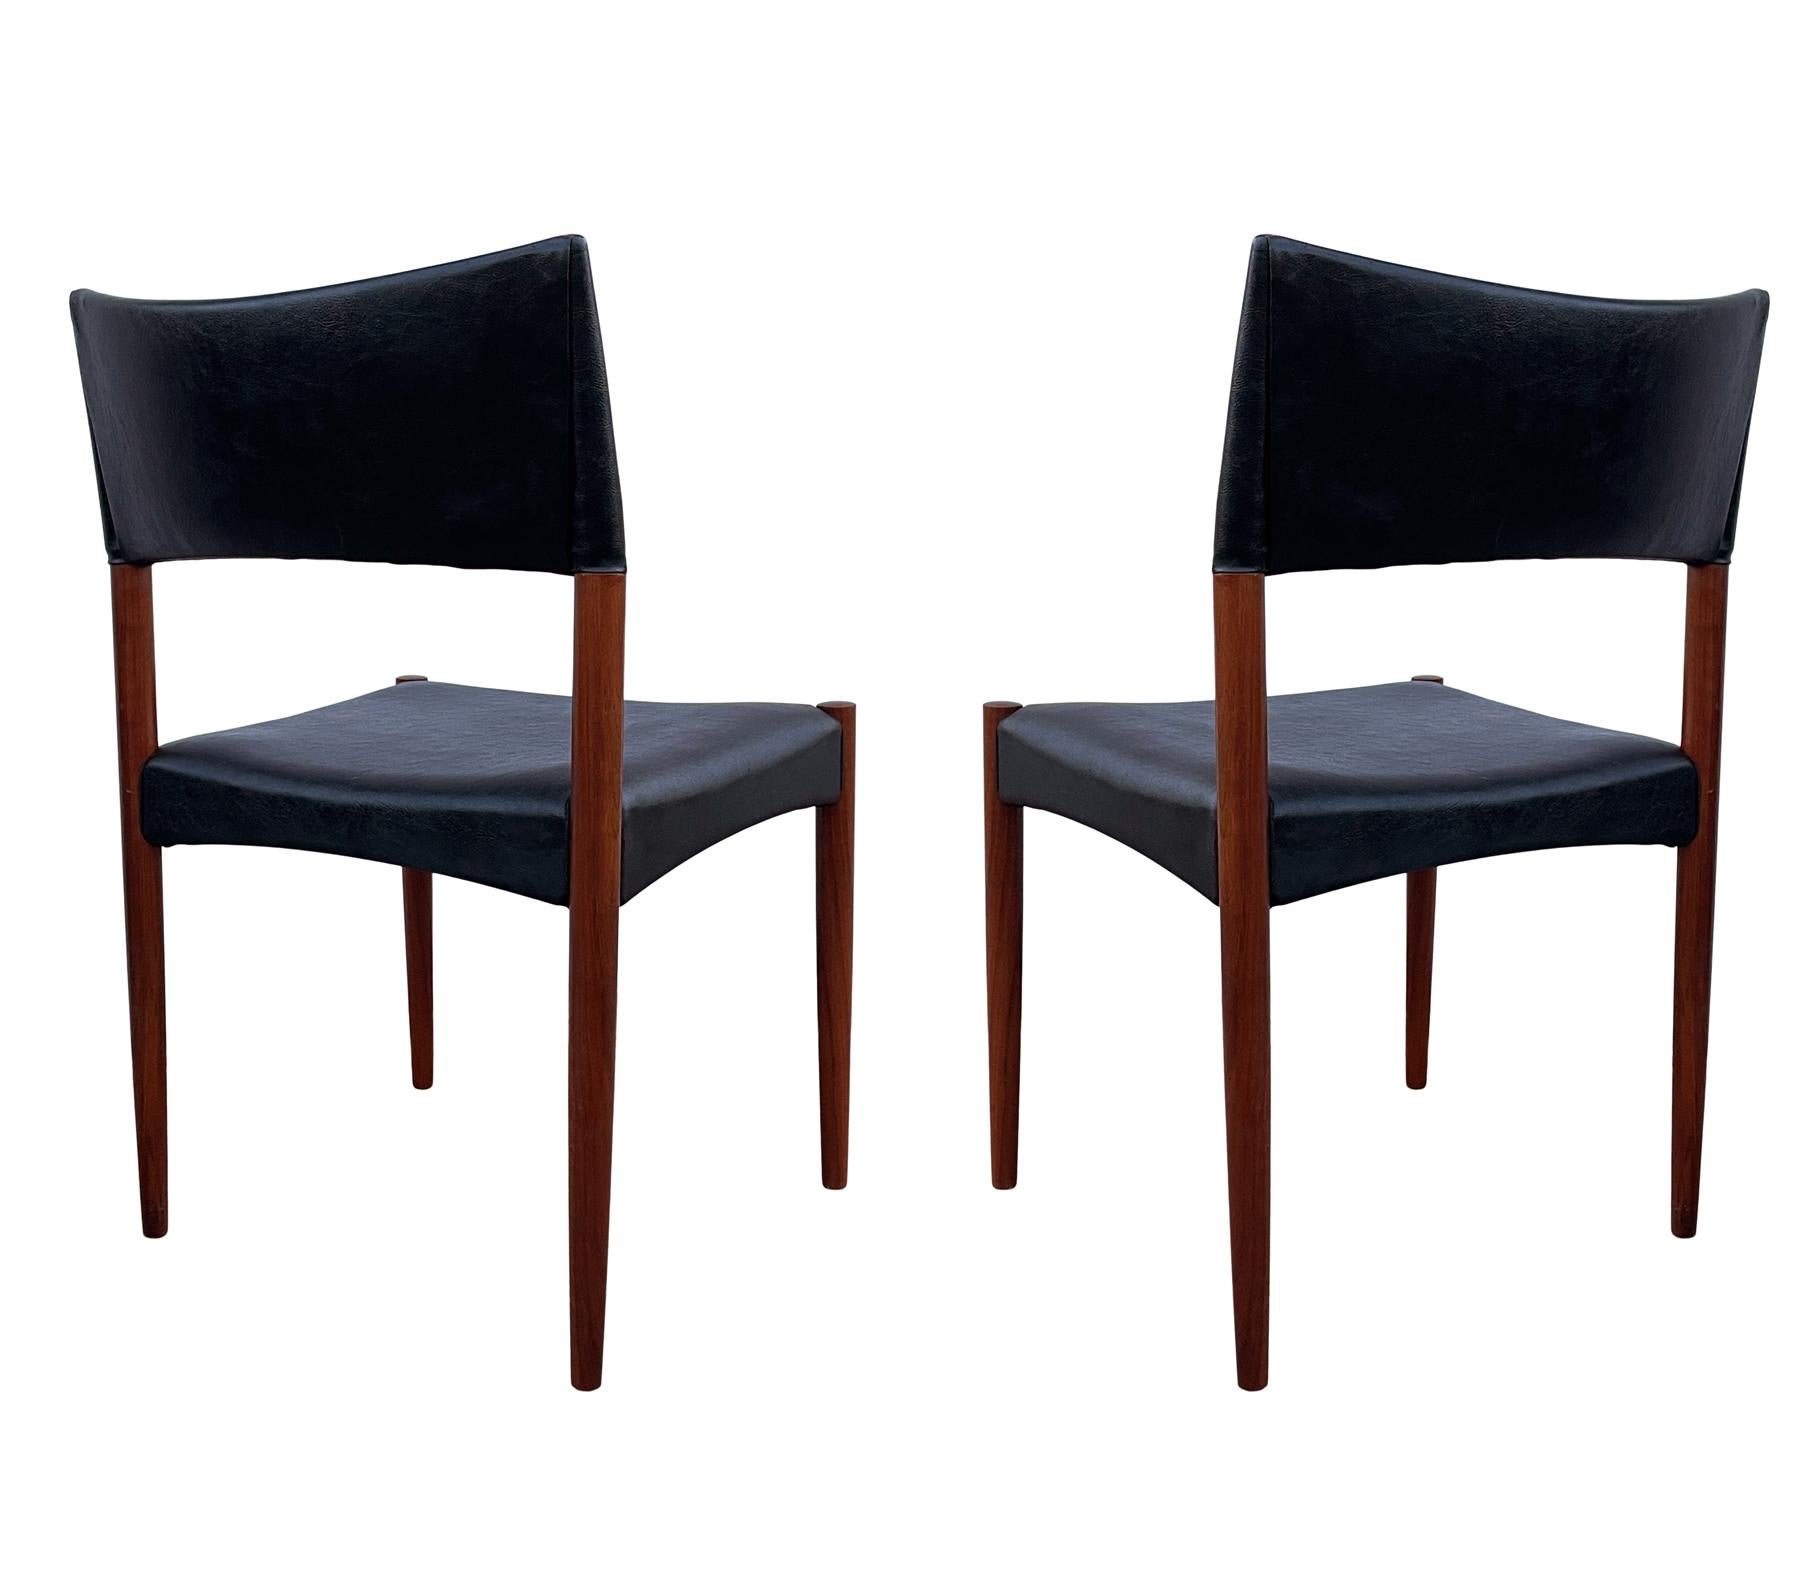 Set of 4 Mid Century Danish Modern Dining Chairs in Teak by Villy Schou Andersen In Good Condition For Sale In Philadelphia, PA